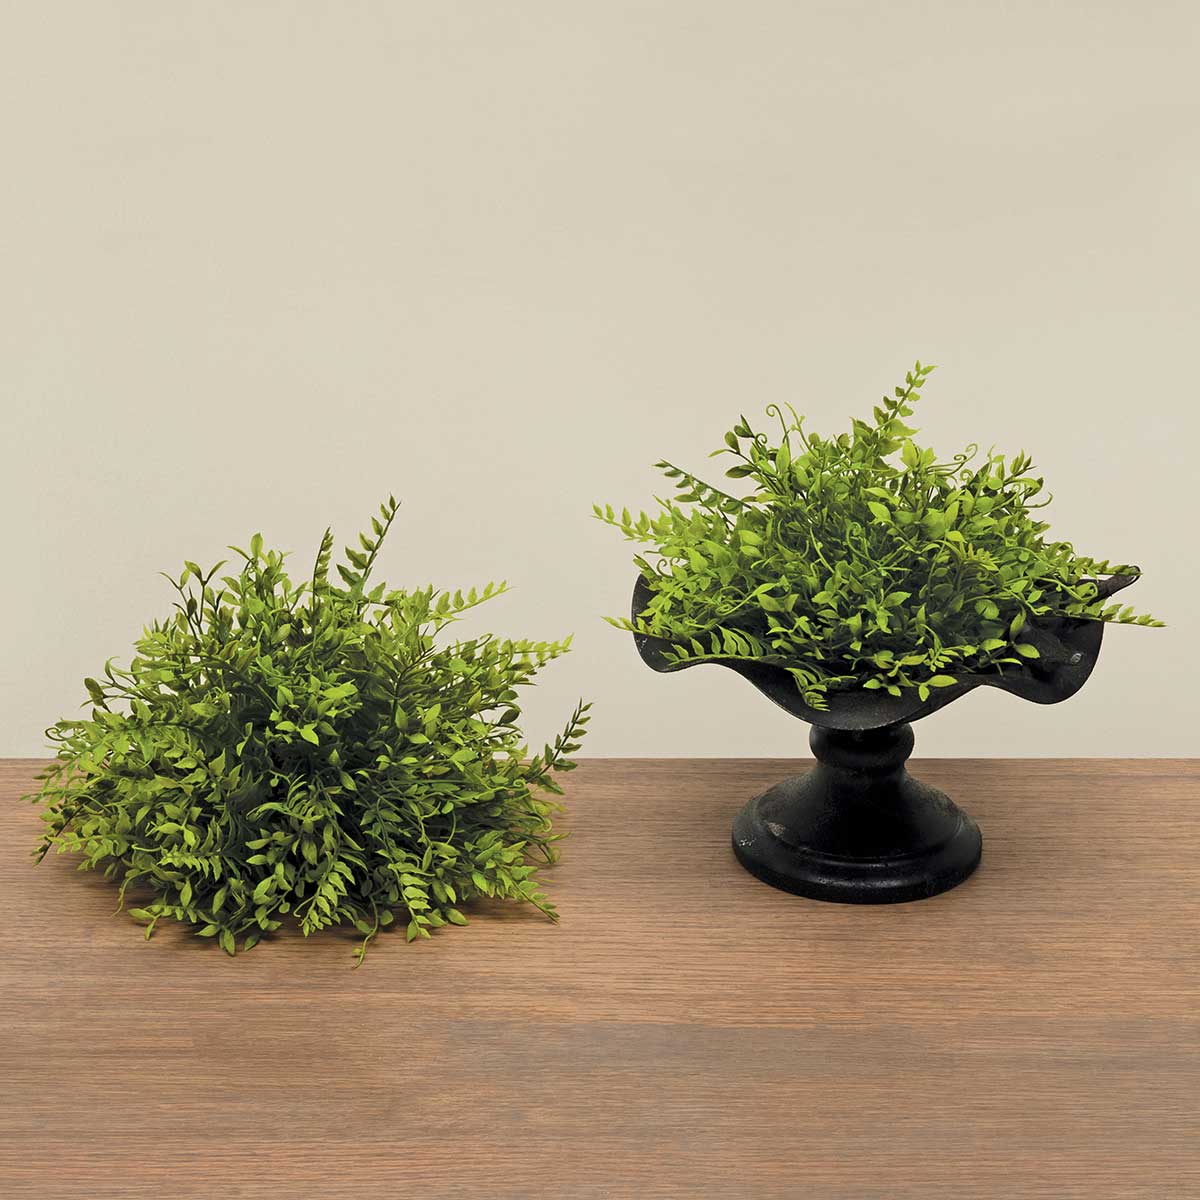 DOME MINI PRIVET AND FERN LARGE 10IN X 7IN - Click Image to Close